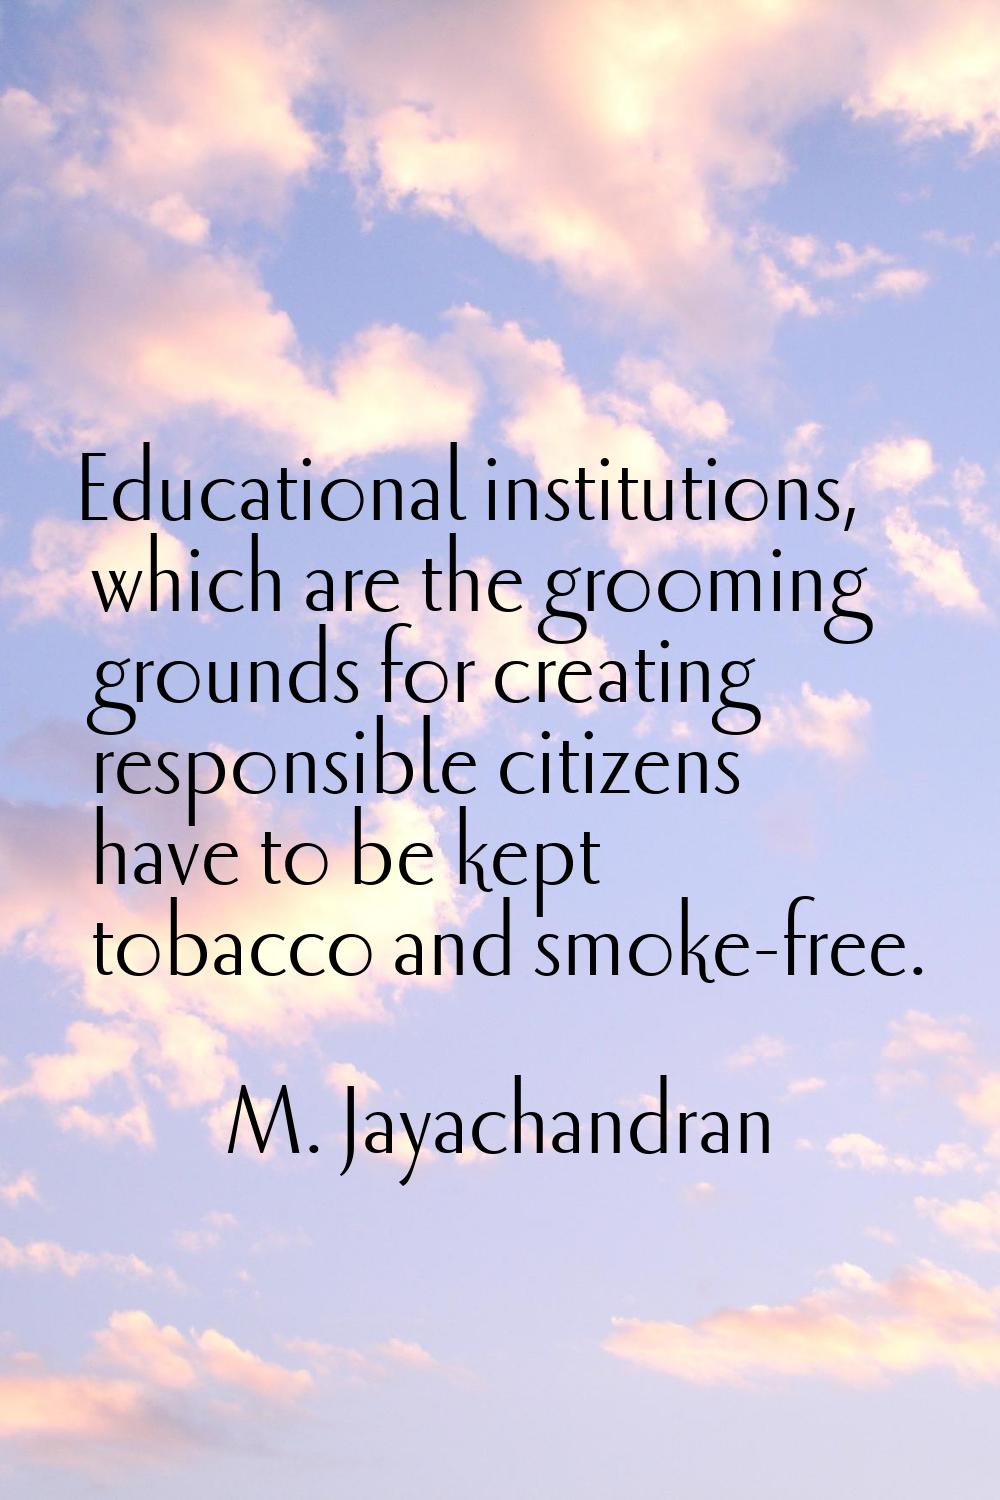 Educational institutions, which are the grooming grounds for creating responsible citizens have to 